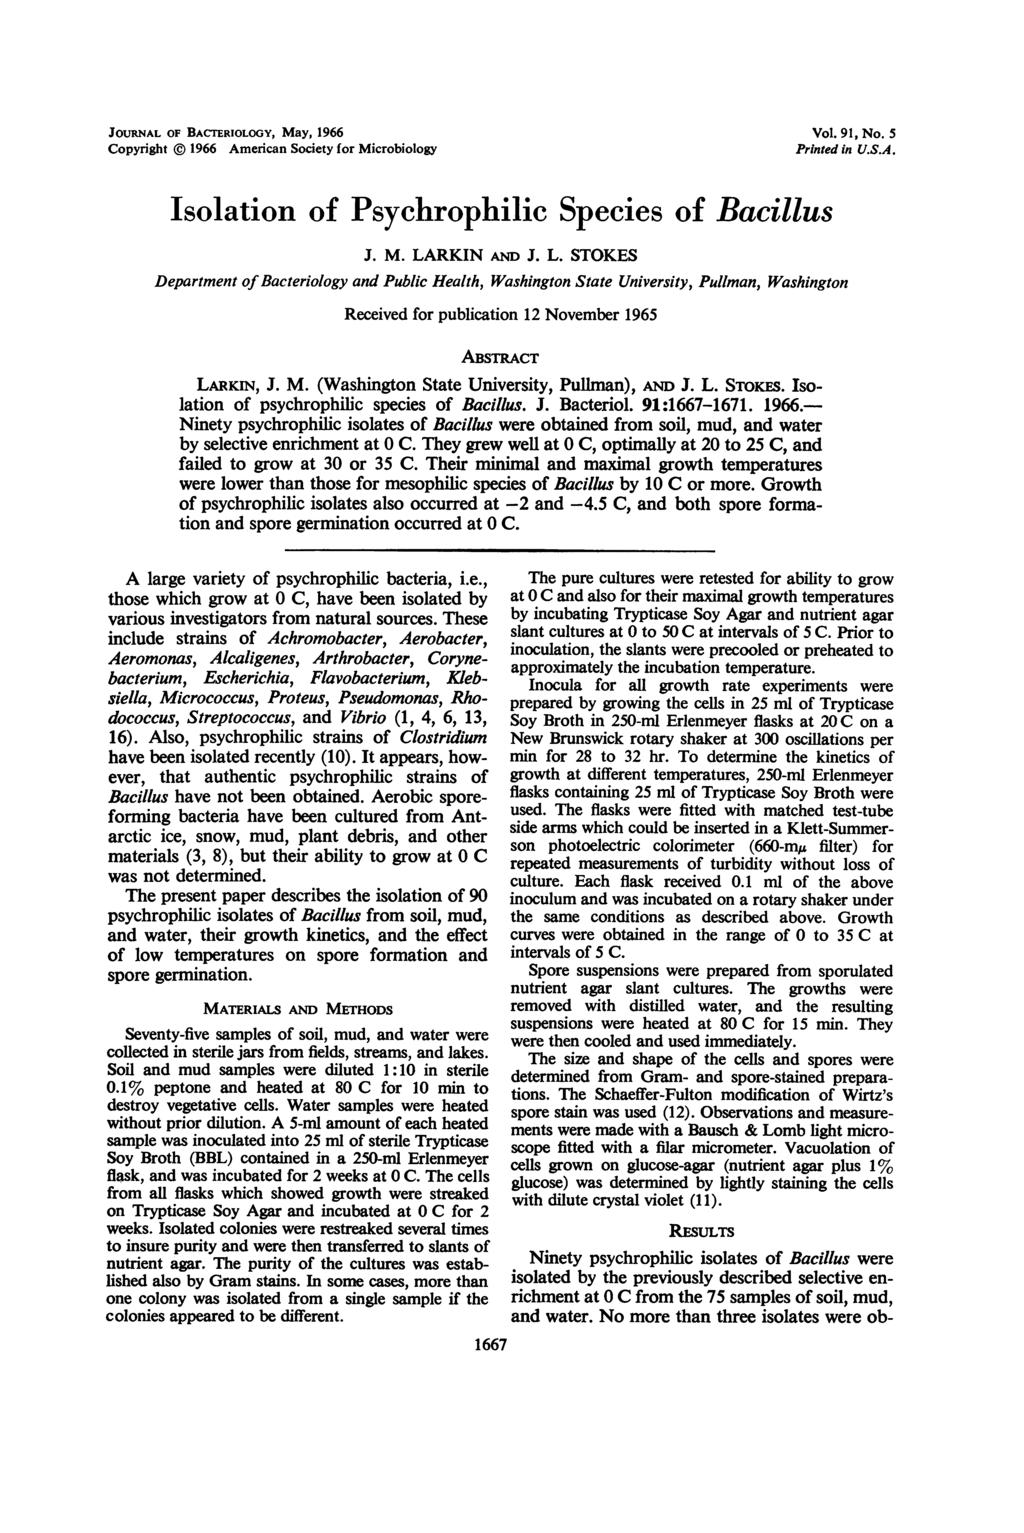 JOURNAL OF BACTERIOLOGY, May, 1966 Copyright 1966 American Society for Microbiology Vol. 91, No. 5 Printed in U.S.A. Isolation of Psychrophilic Species of Bacillus J. M. LA